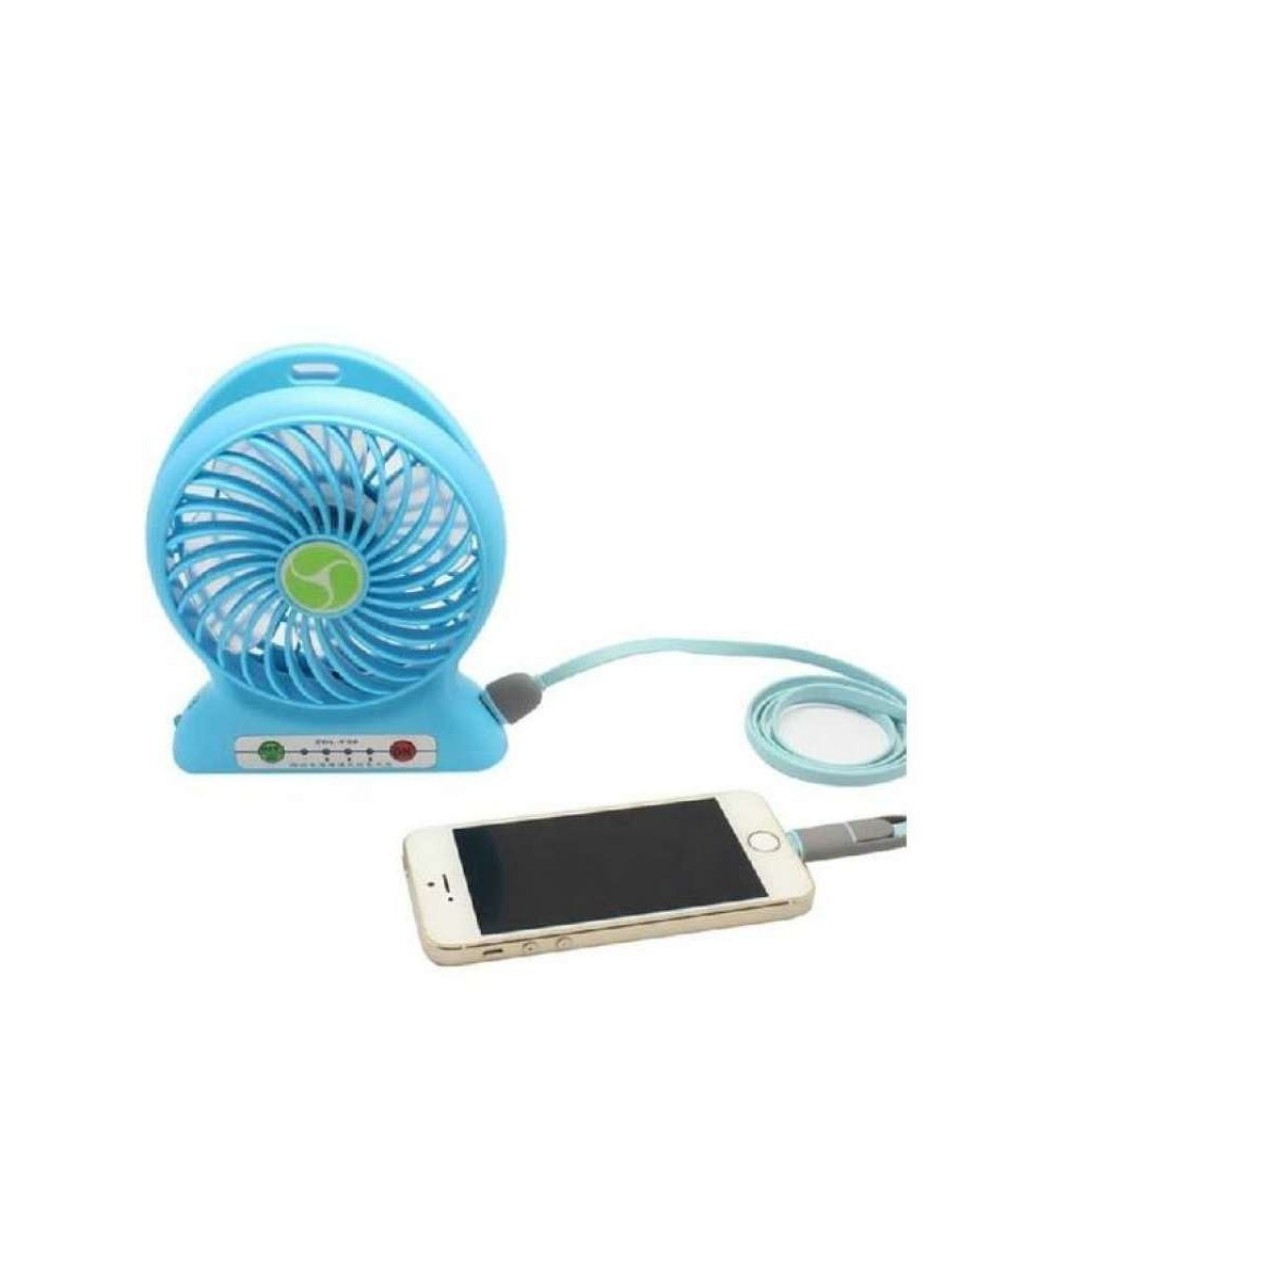 Rechargeable Mini Portable Fan with Power Bank - Blue